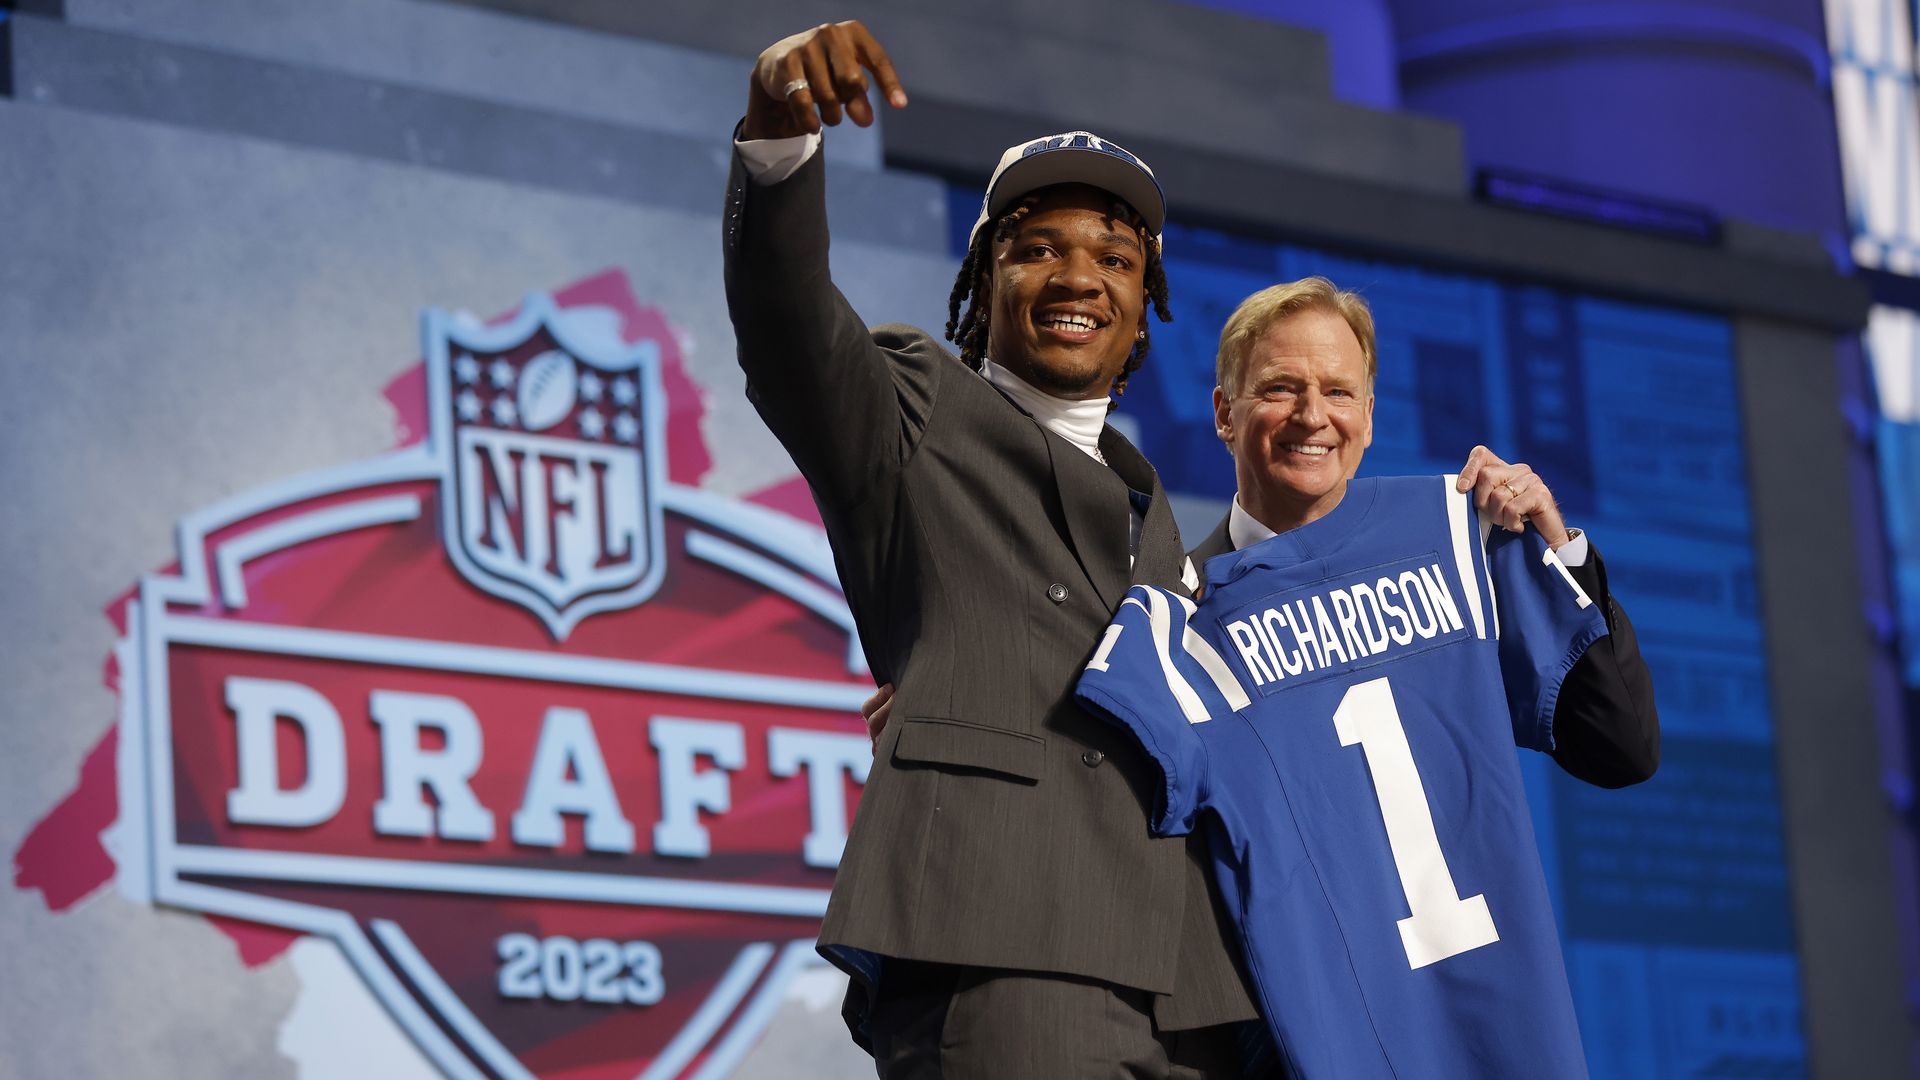 Anthony Richardson poses with NFL Commissioner Roger Goodell, who holds a Richardson Indianapolis Colts jersey, at the NFL Draft.